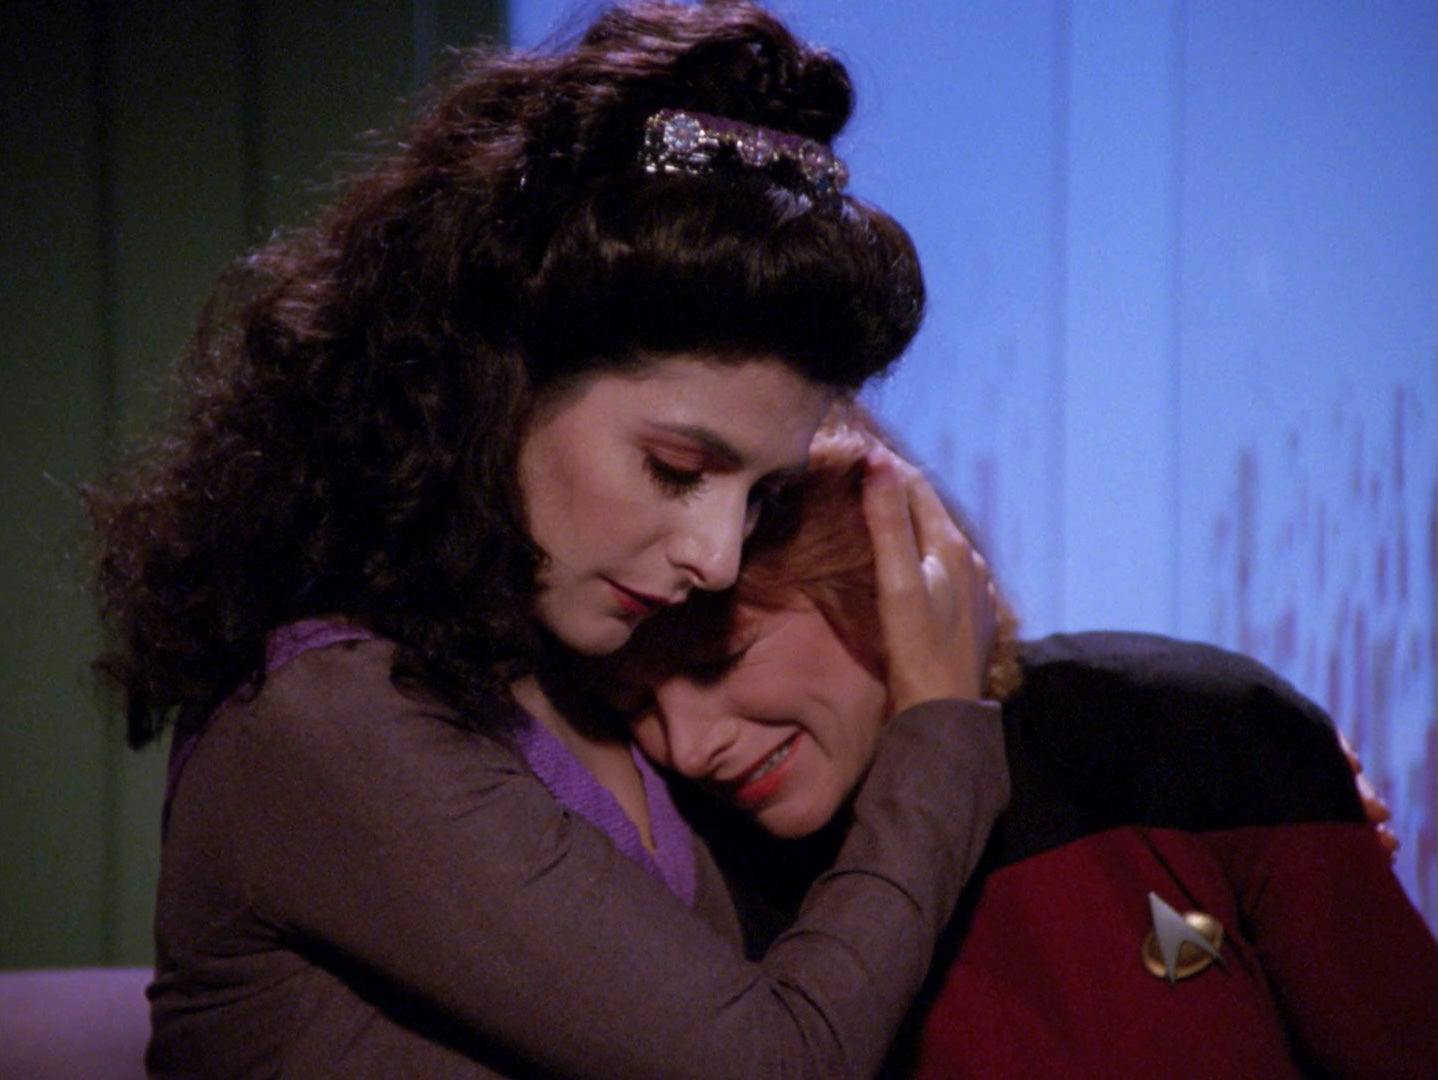 Deanna Troi consoles a Starfleet officer during a counseling session